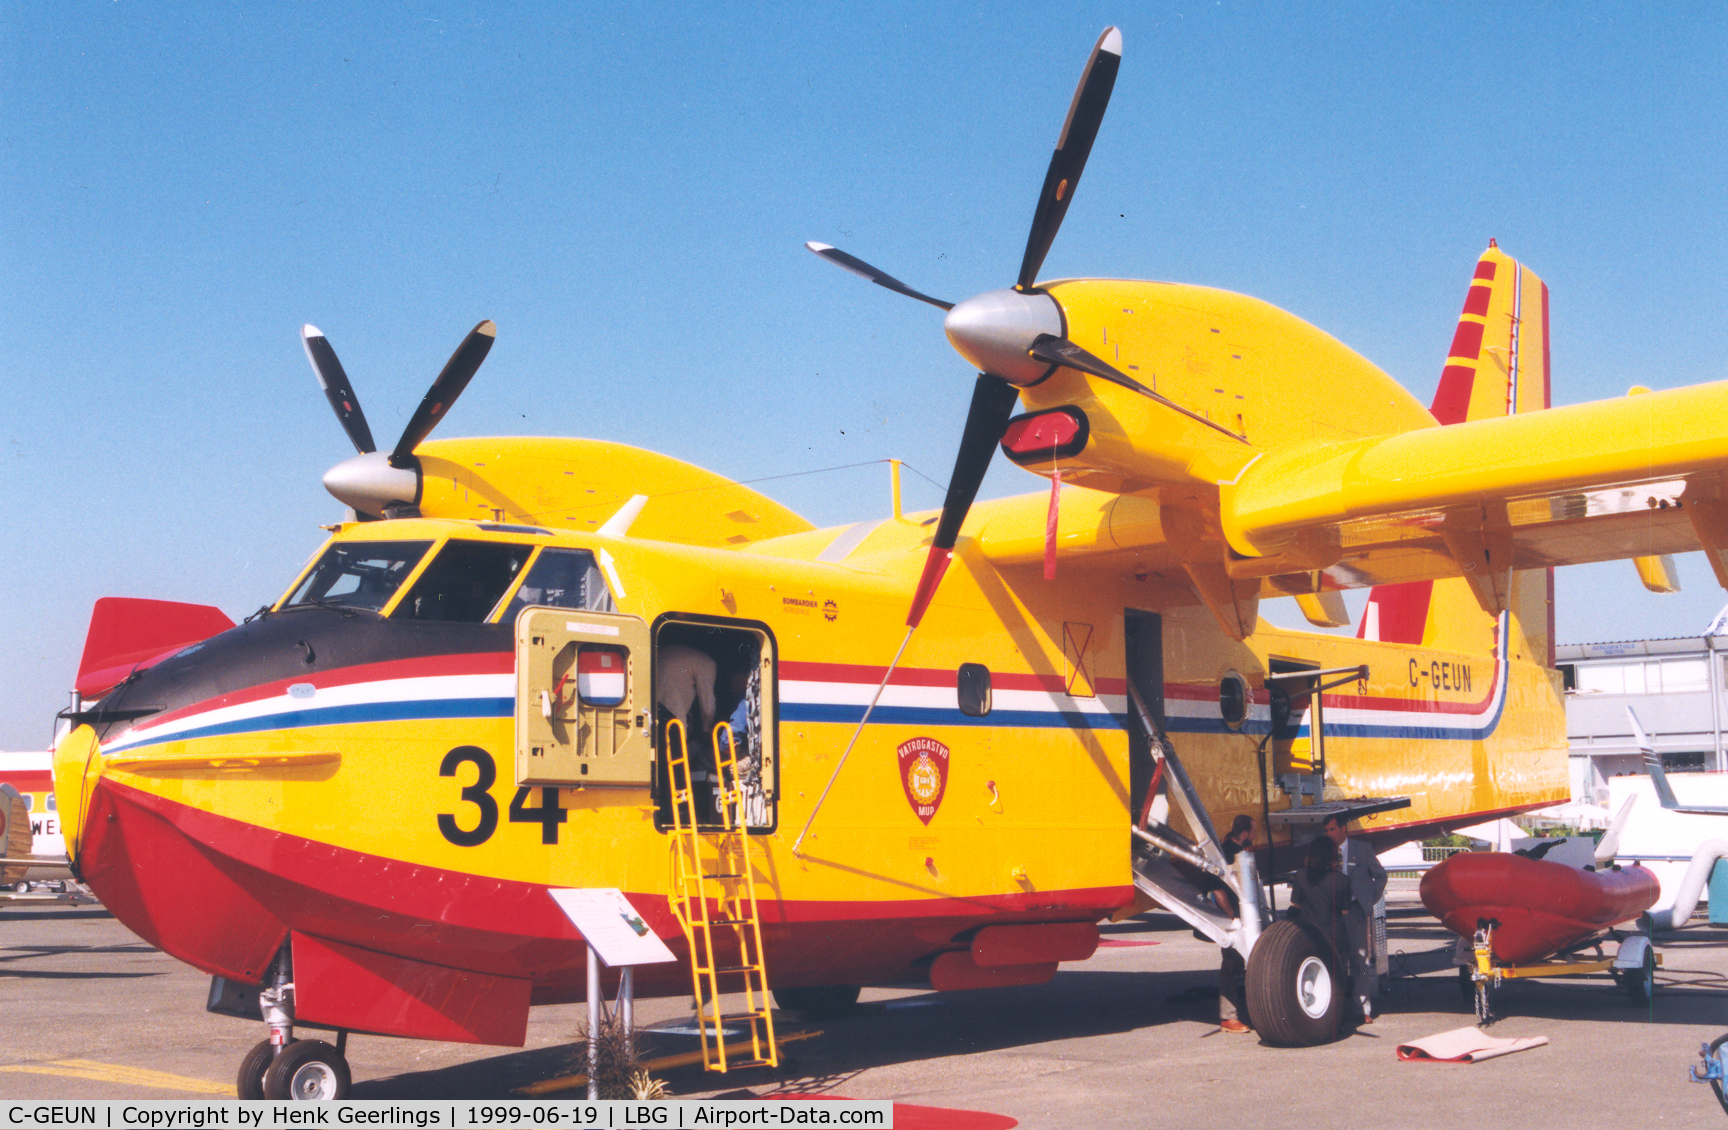 C-GEUN, Canadair CL-215-6B11 CL-415 C/N 2041, Le Bourget Air Show 1999.

Plane will be delivered to Croation AF